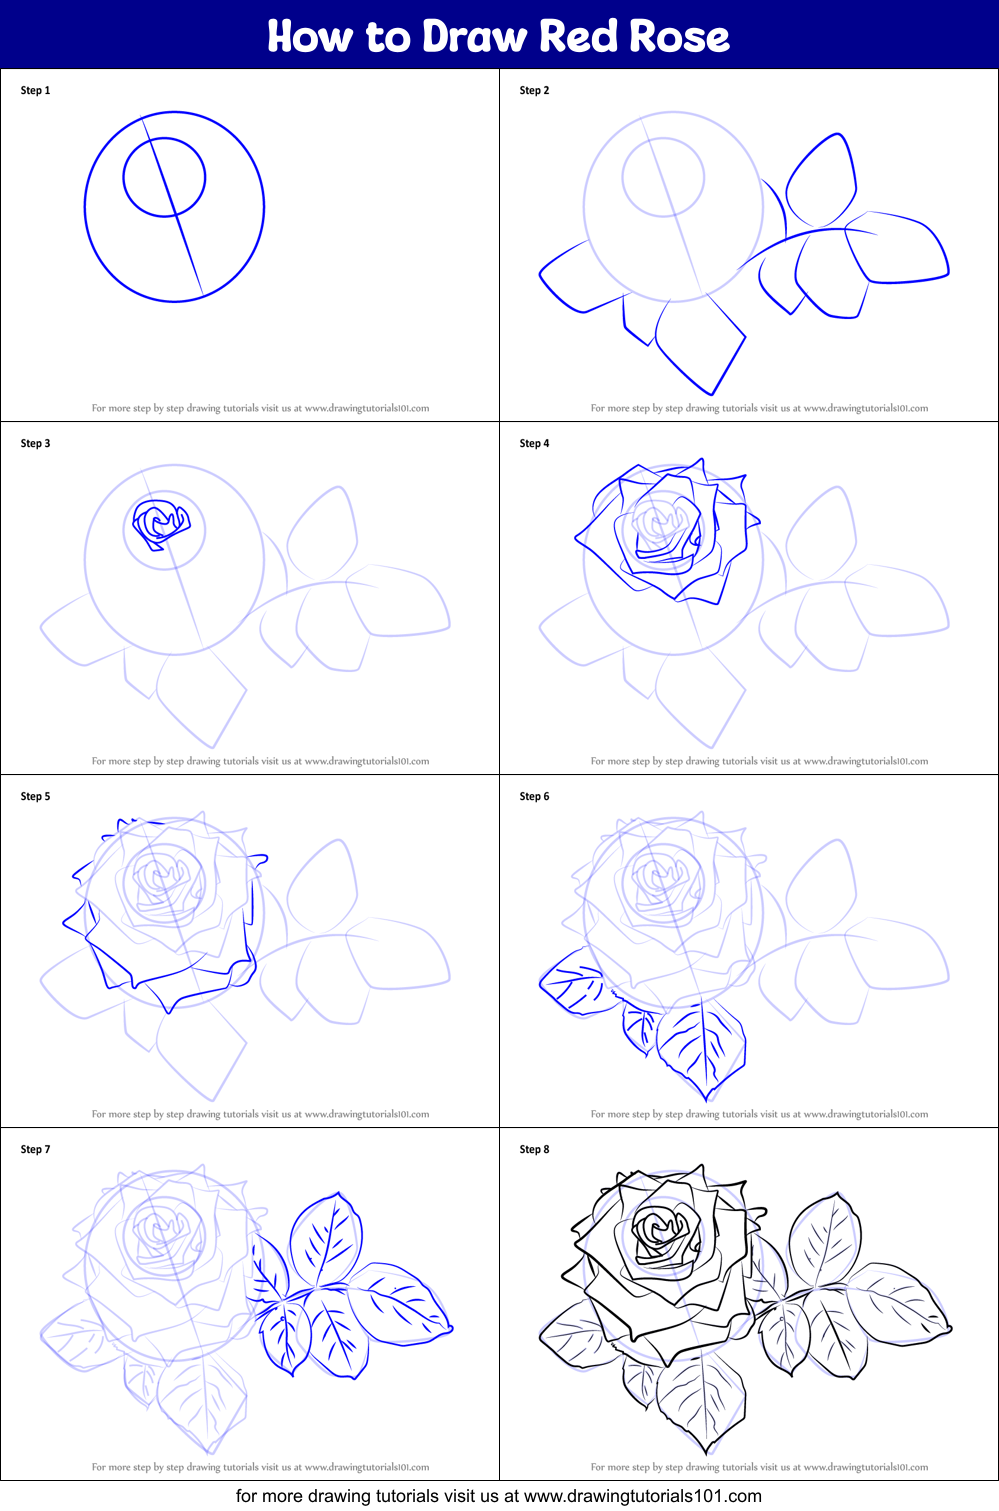 How To Draw Red Rose Printable Step By Step Drawing Sheet Drawingtutorials101 Com